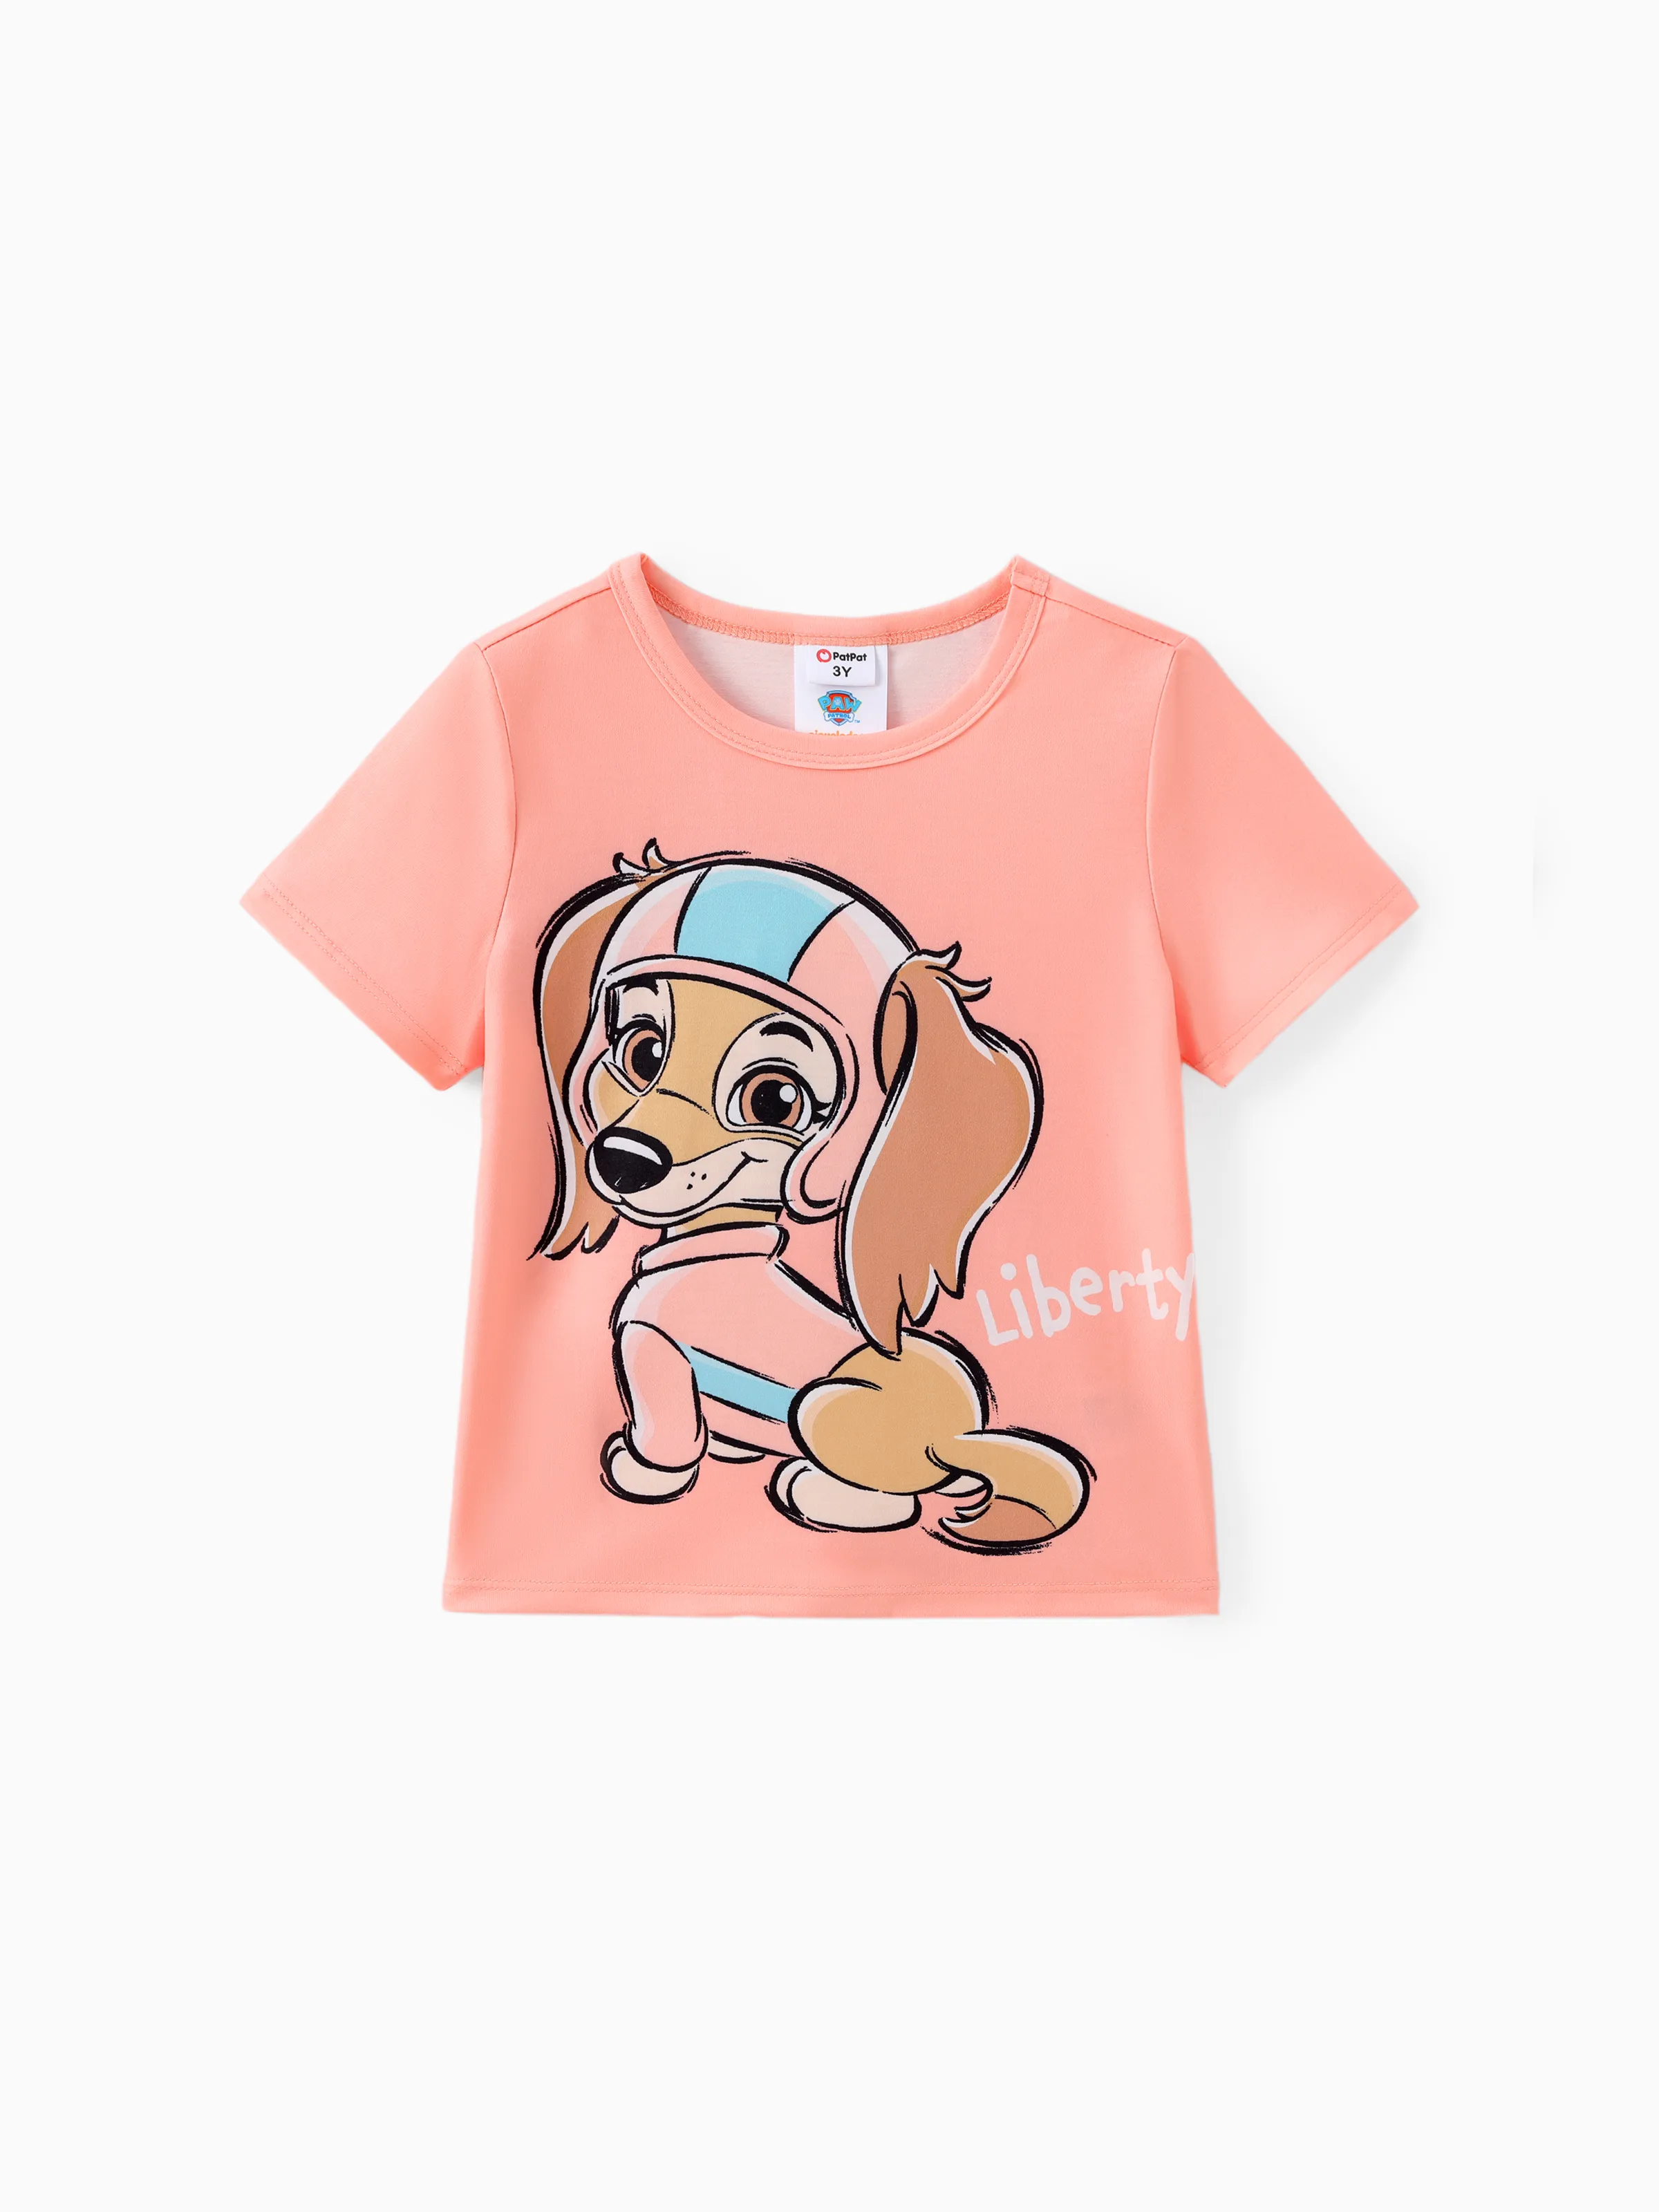 

PAW Patrol Toddler Boy/Toddler Girl Positioned printed graphic T-shirt